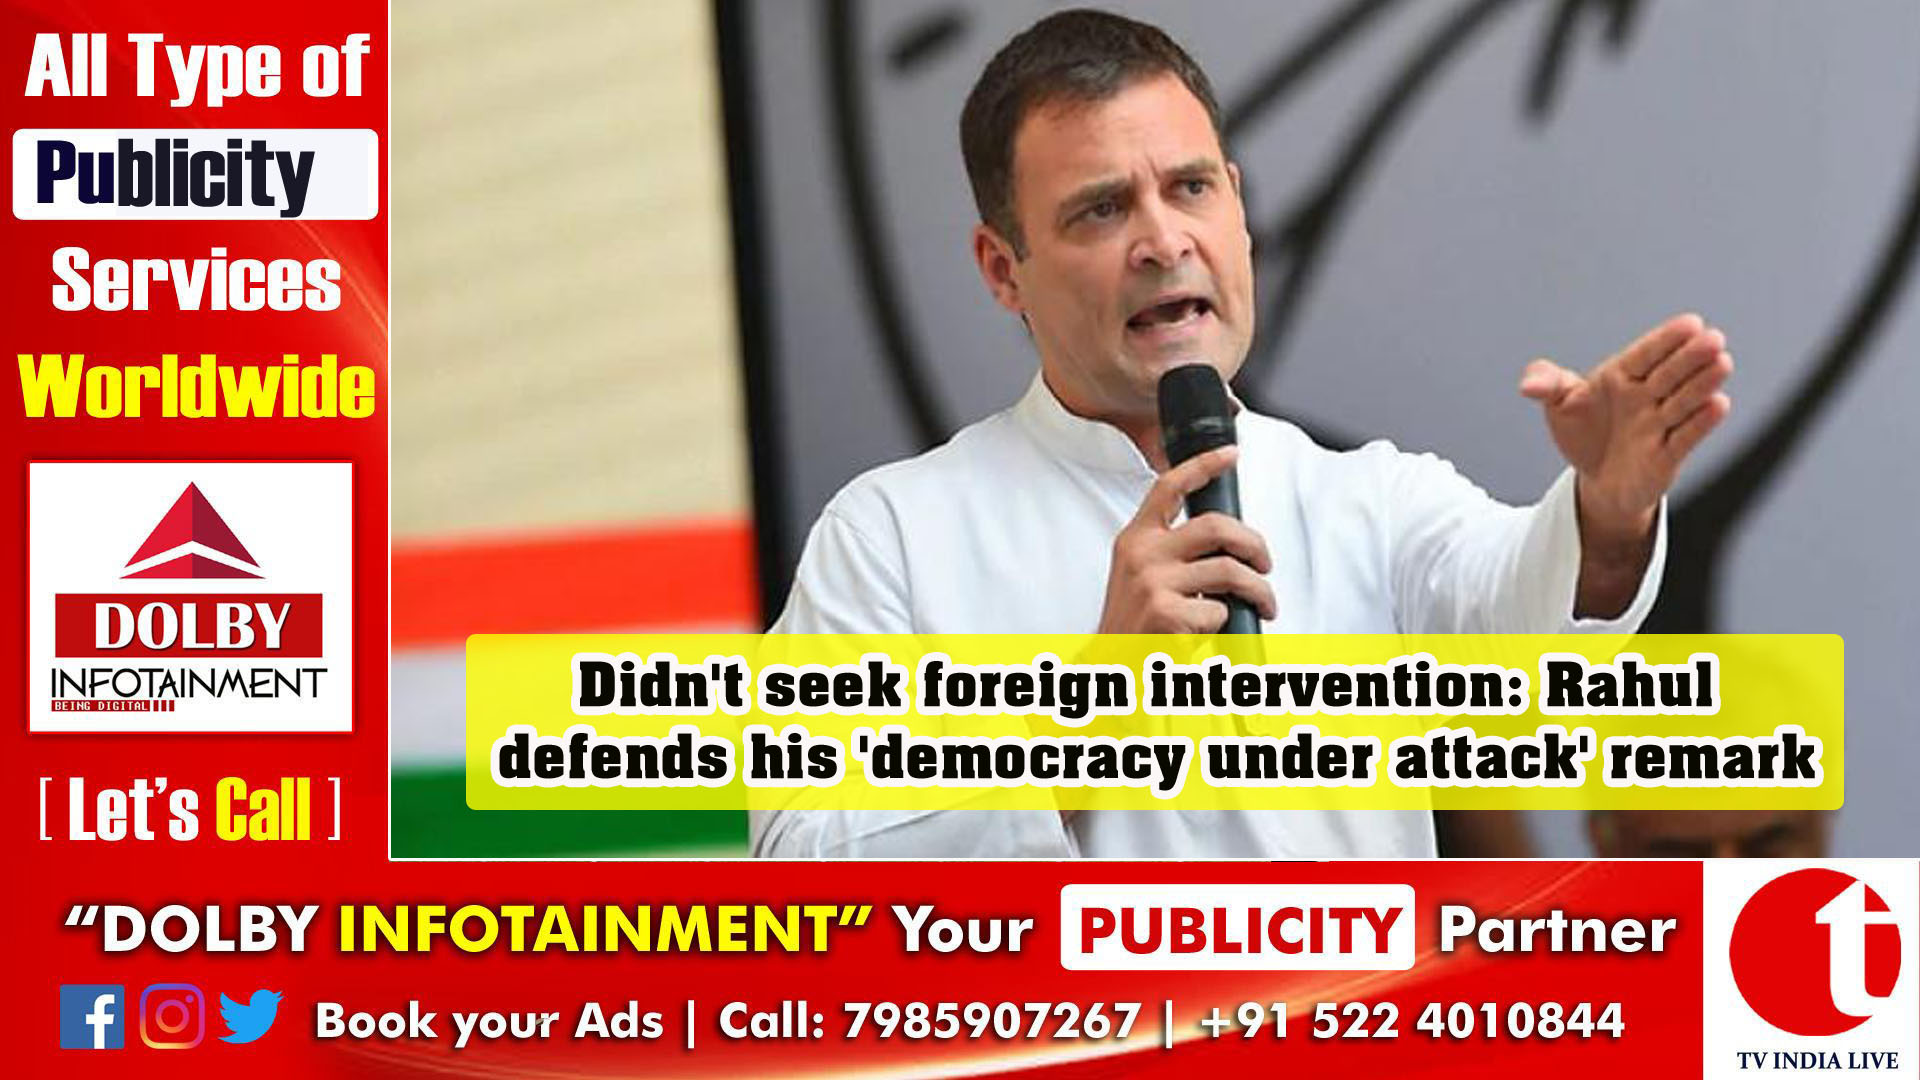 Didn't seek foreign intervention: Rahul defends his 'democracy under attack' remark